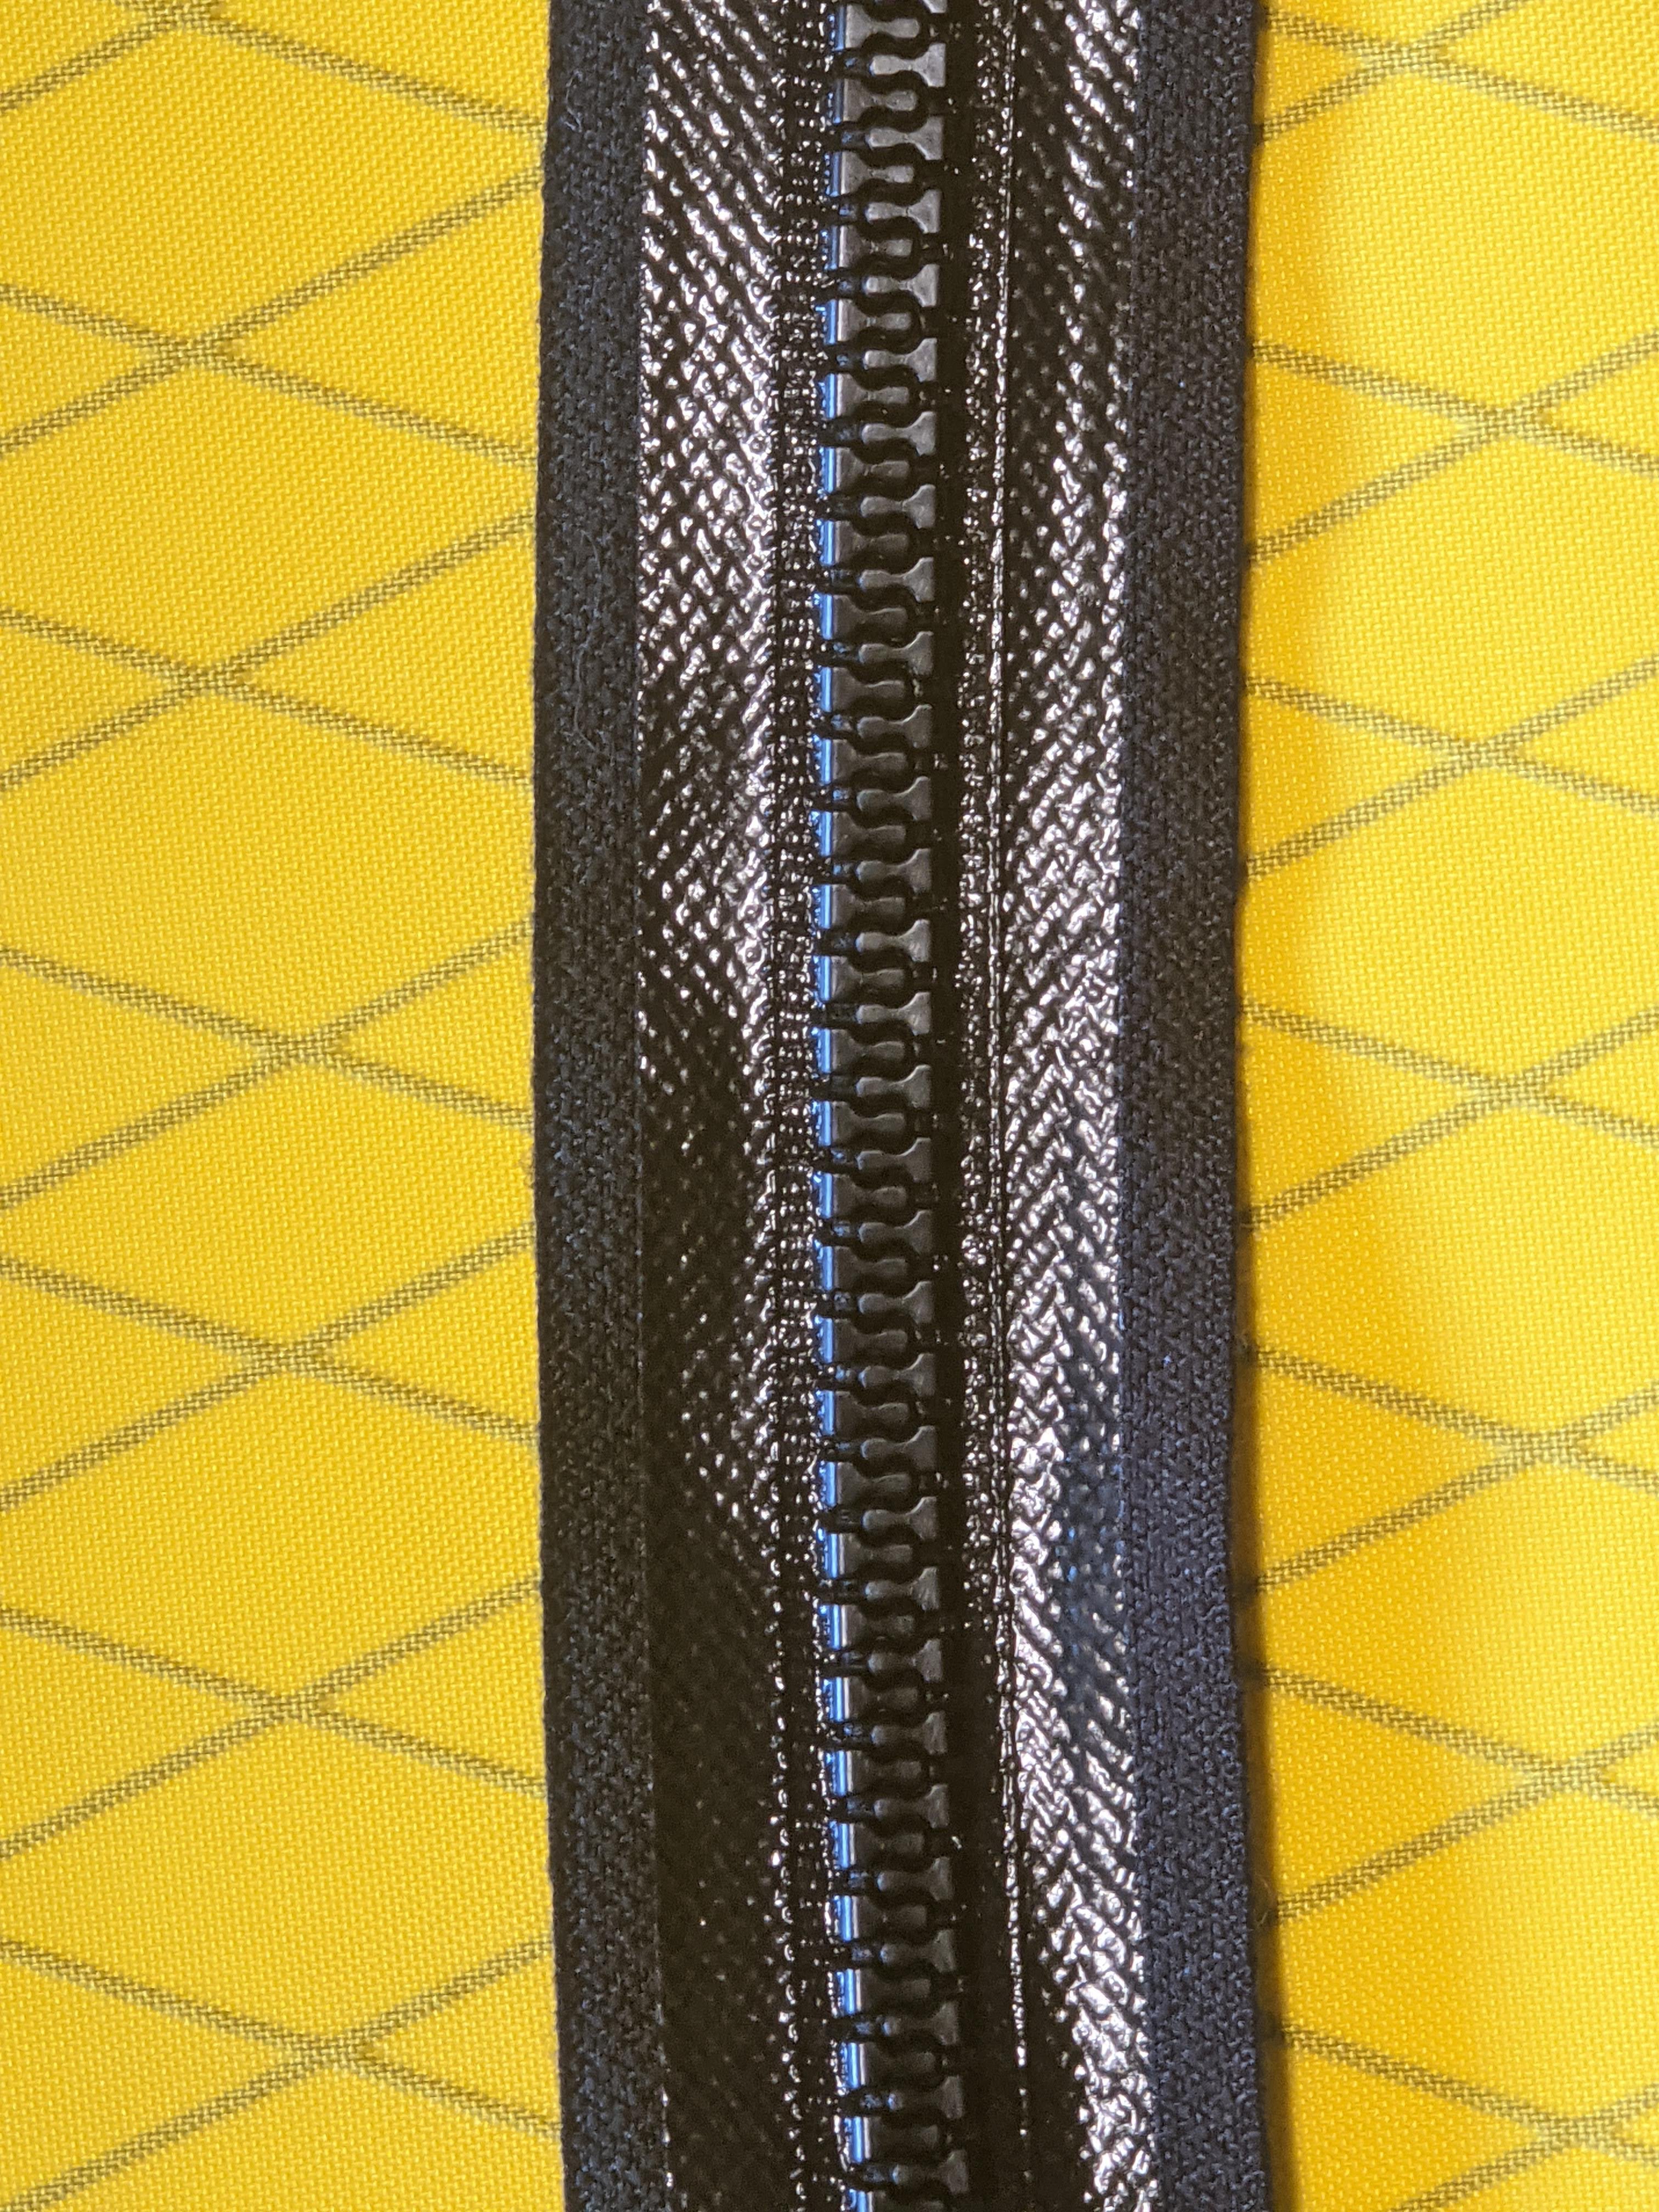 ➡️ Zippers [used in faja crotches] are usually made of a hard plastic